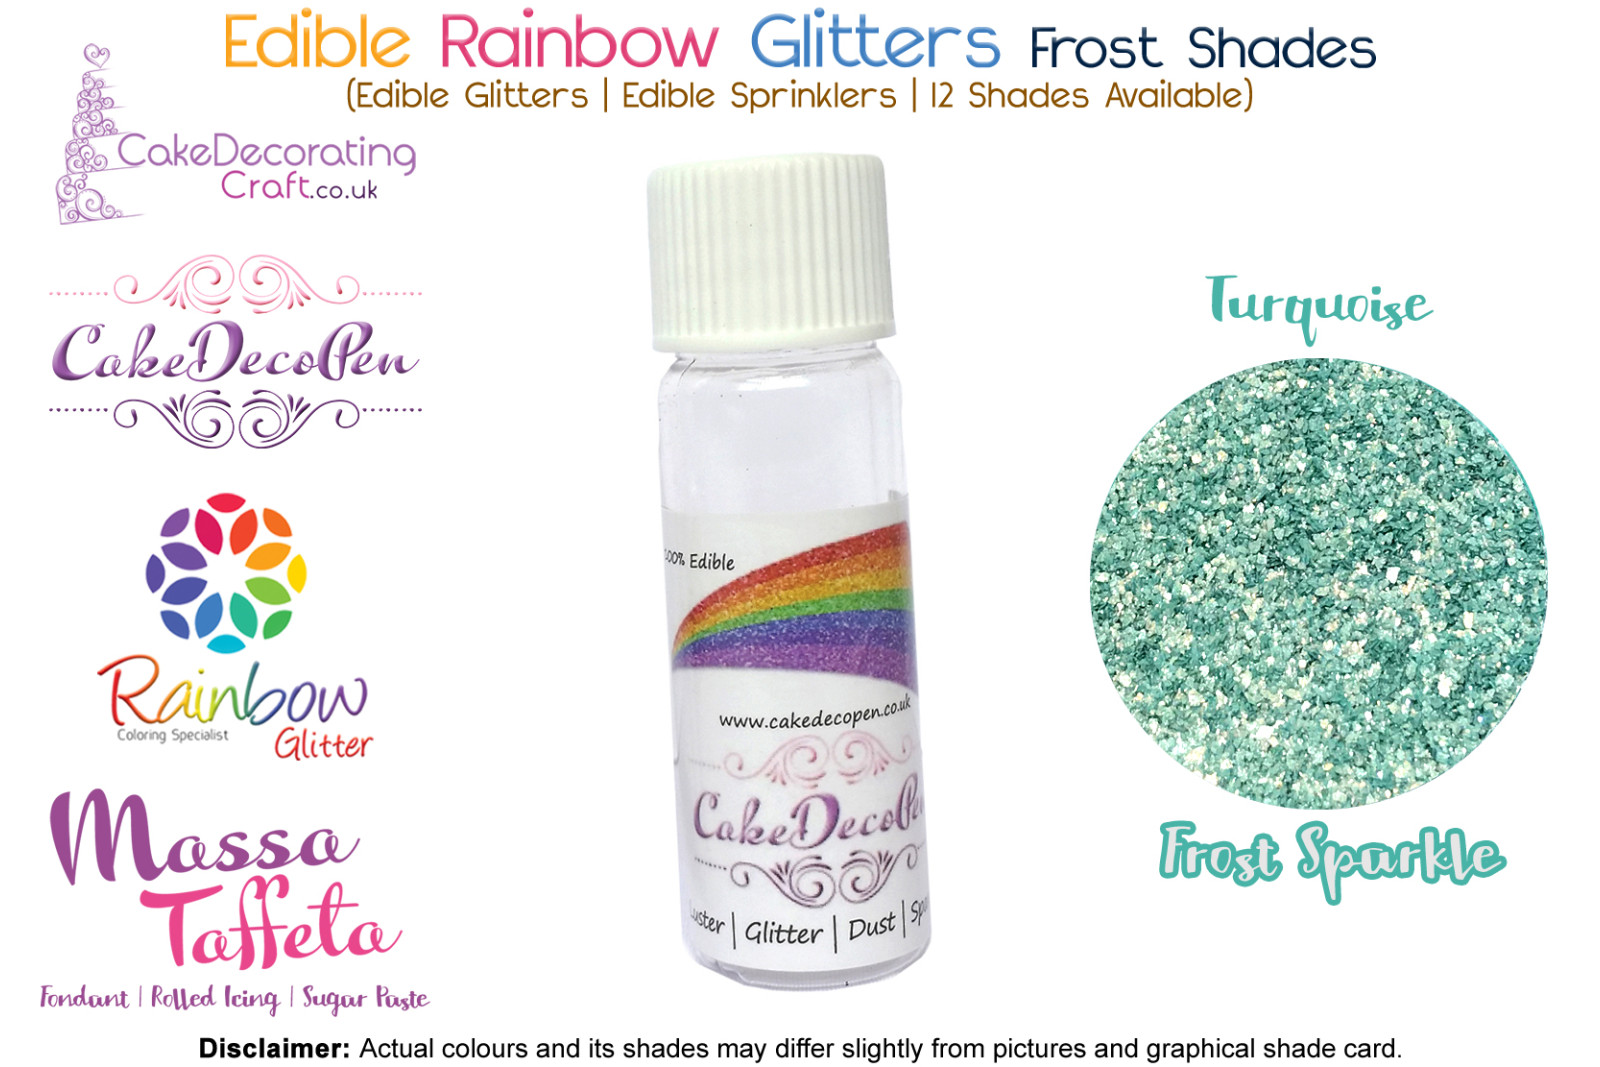 Turquoise | Rainbow Glitter | Frost Shade | 100 % Edible | Cake Decorating Craft | 8 Grams